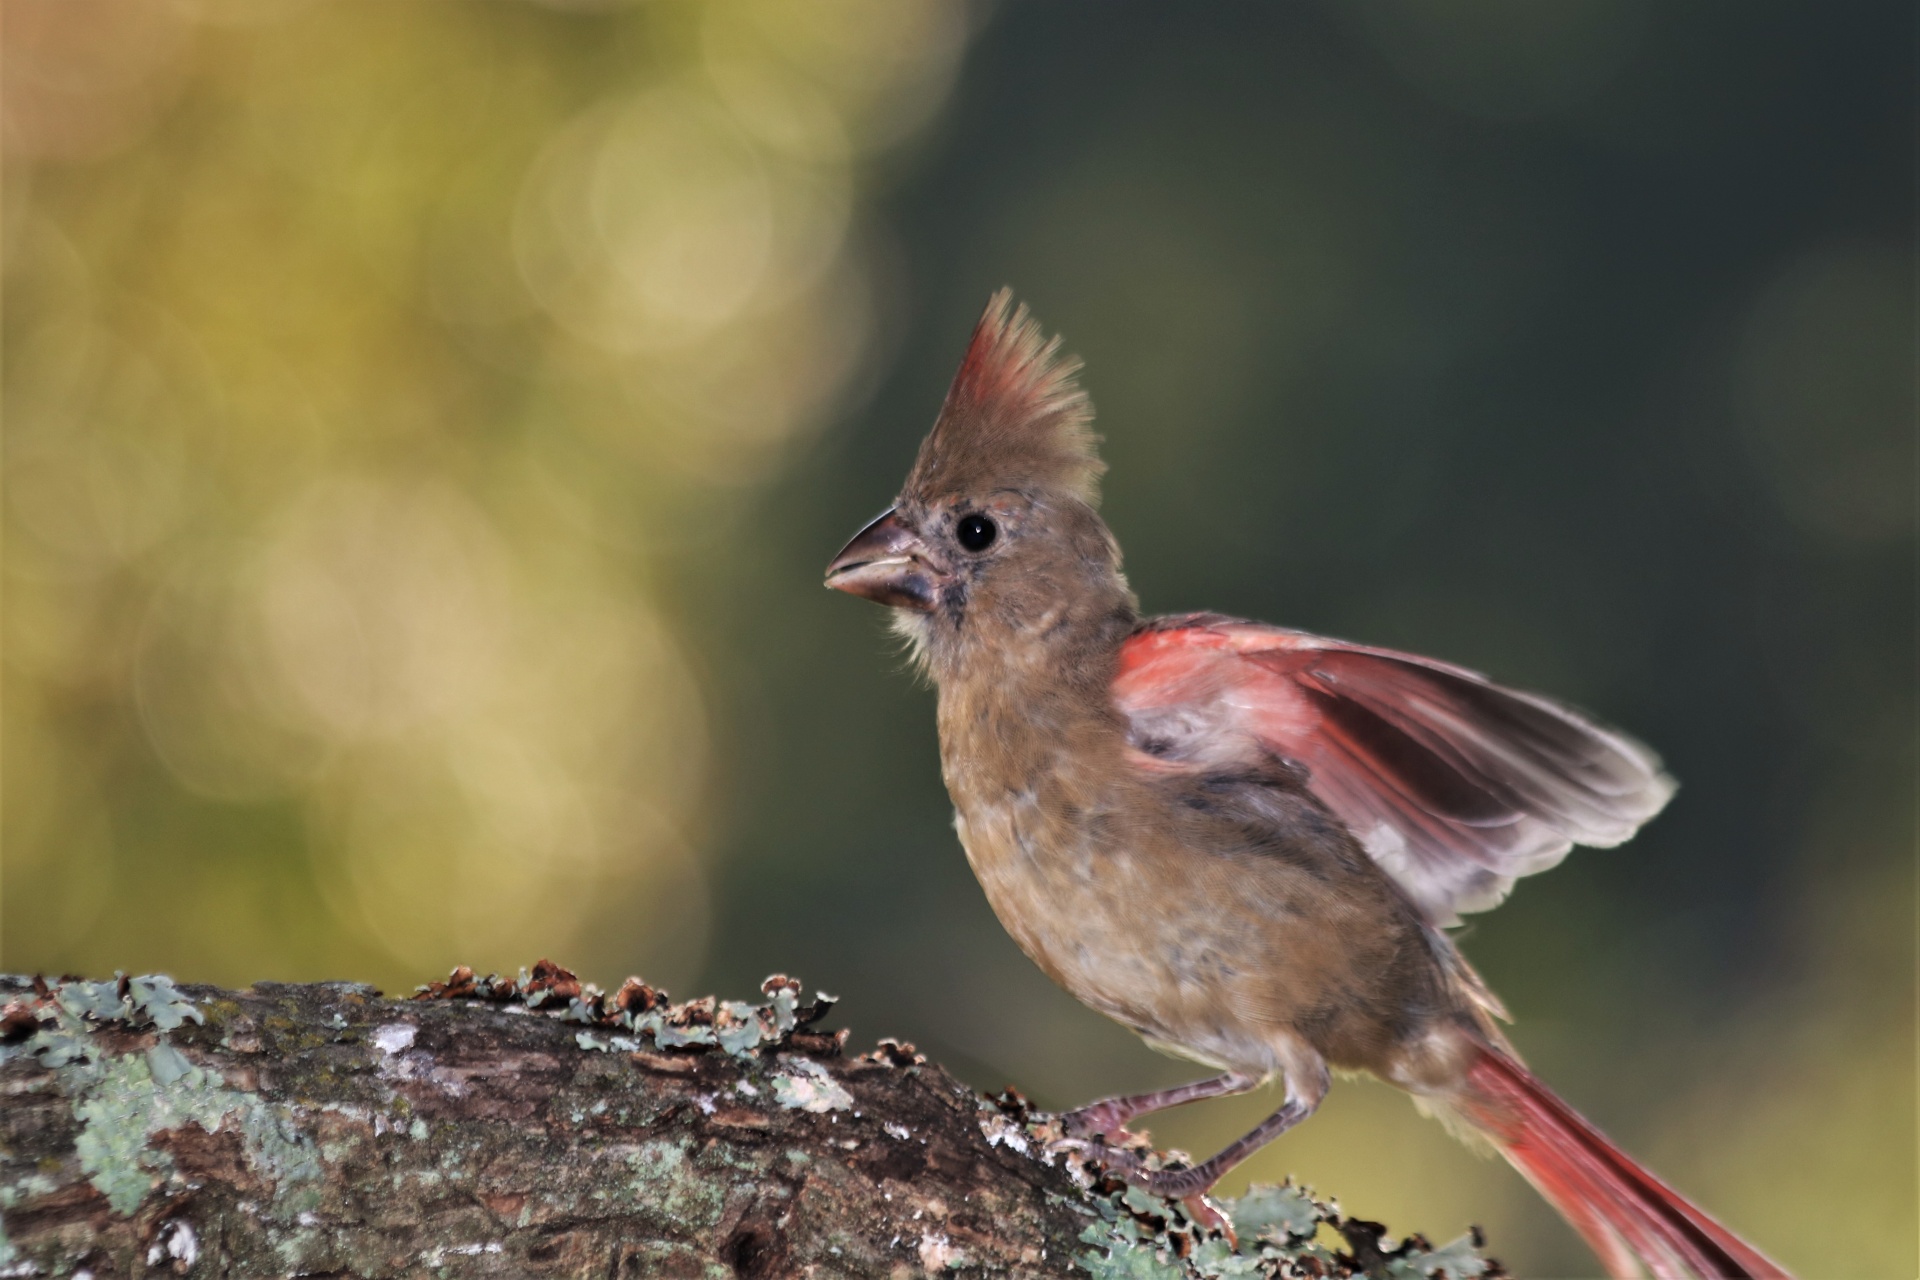 Close-up of a juvenile female cardinal bird, with wings spread, taking off from a tree branch.